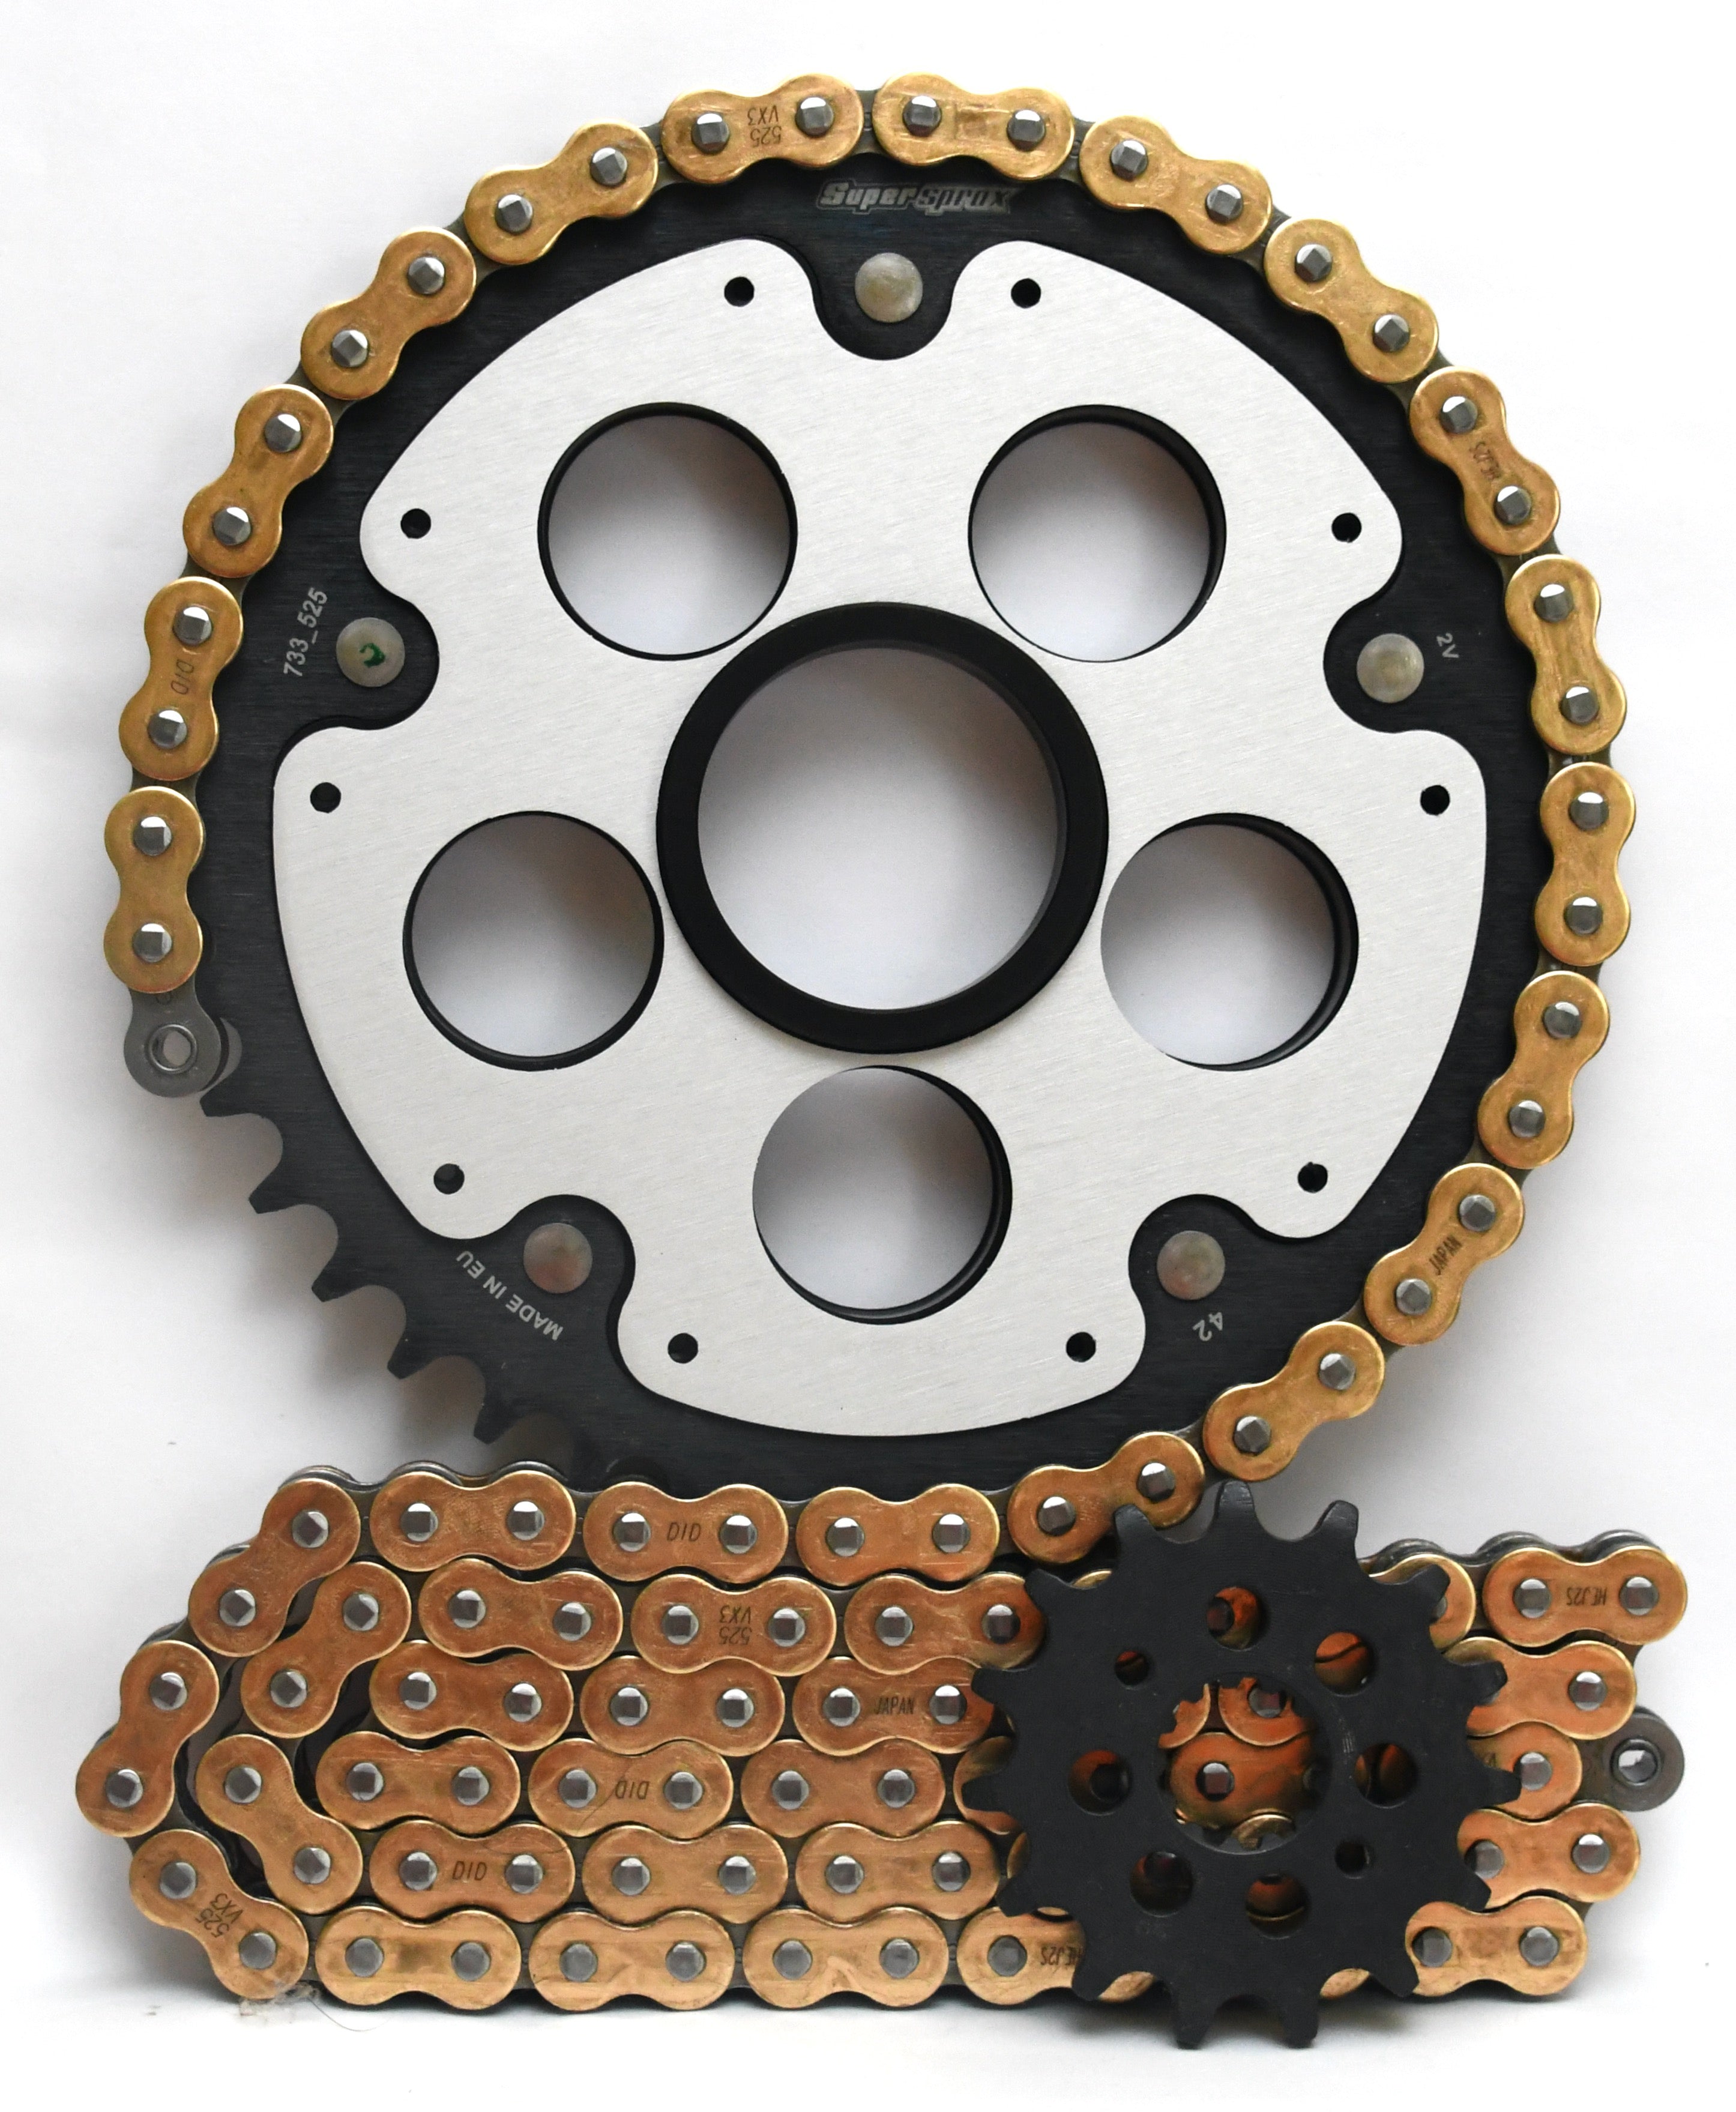 Supersprox Chain & Sprocket Kit for Ducati Multistrada 1000/1100 (S) 2003-2009 - Standard Gearing